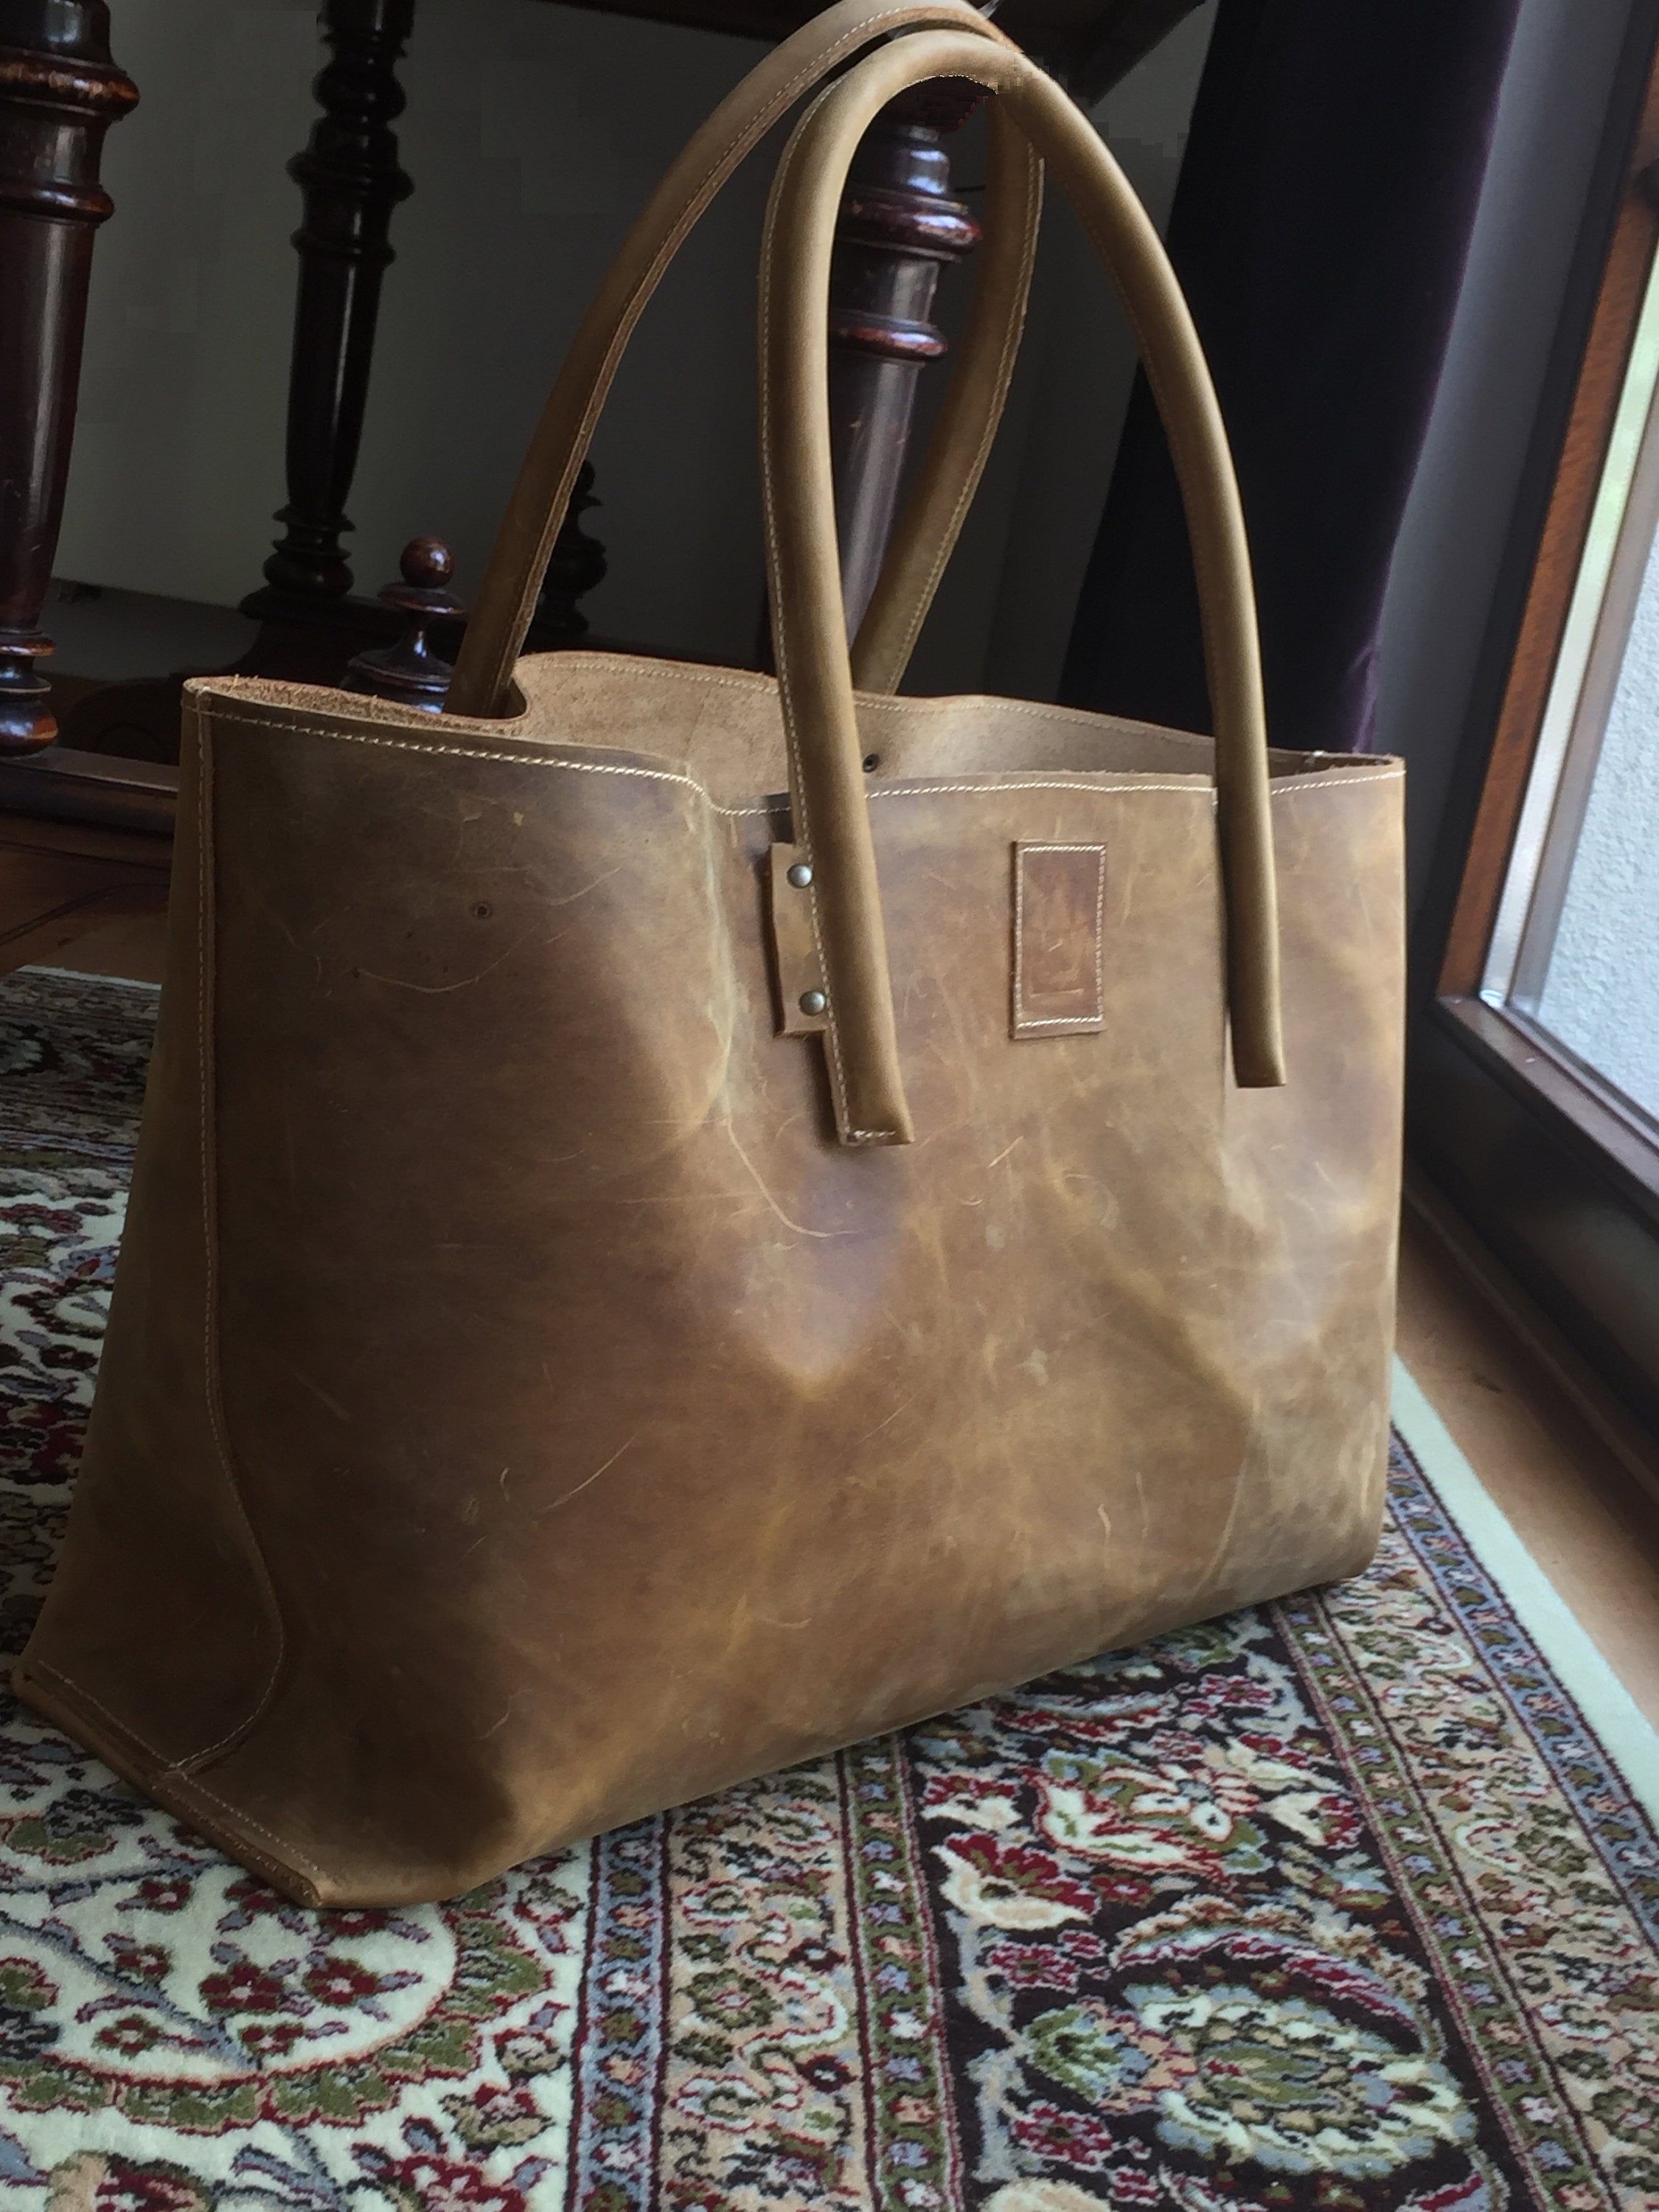 XXL Shopper Leather Tote Bag Leather Bag Shopping Bag Used 